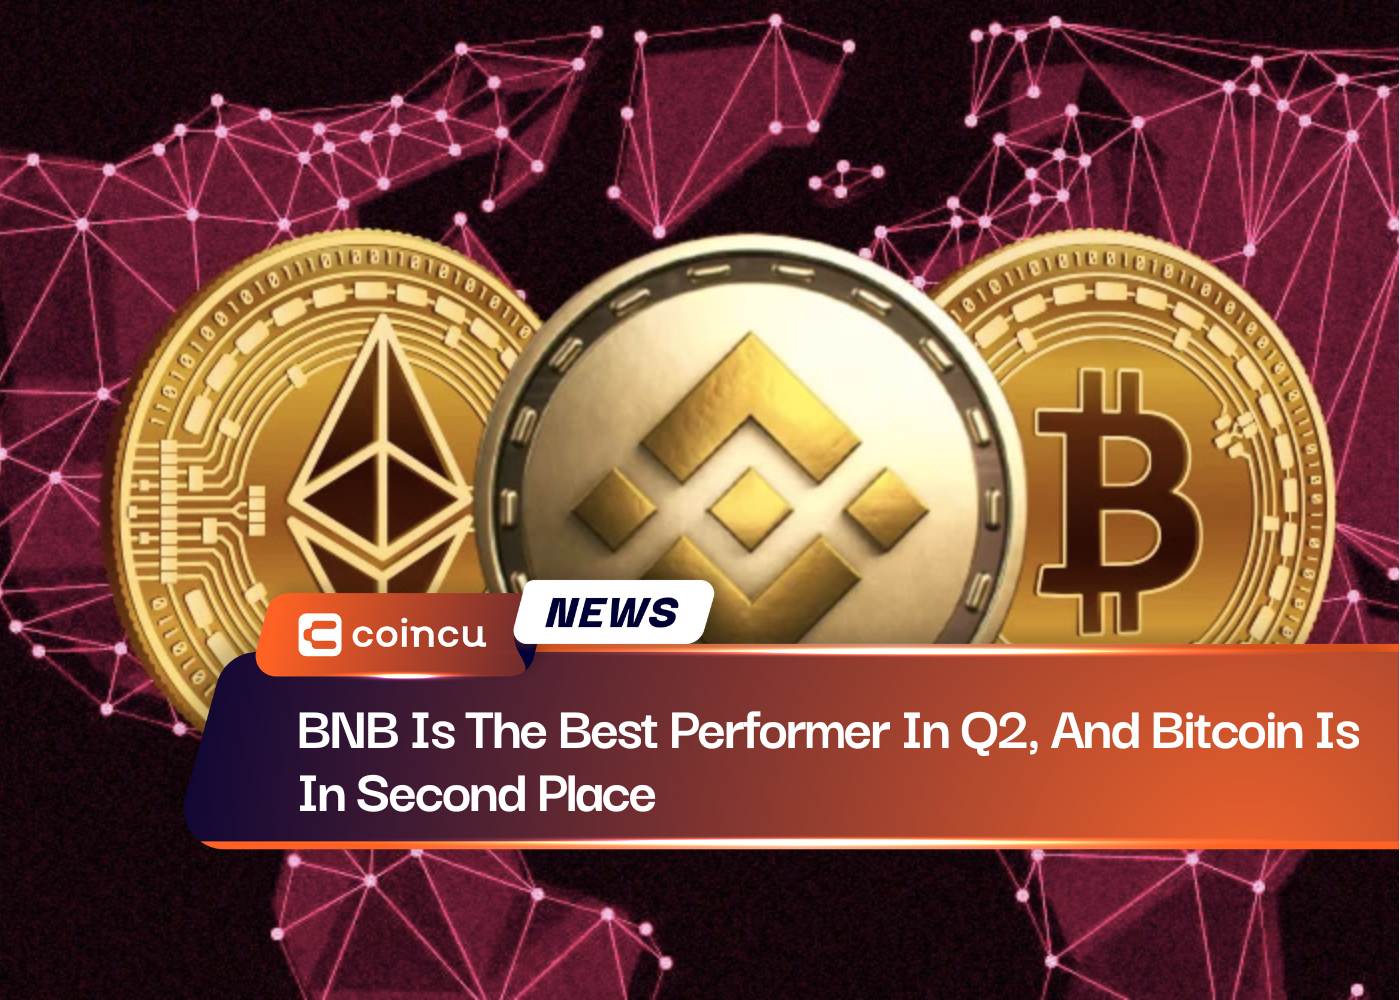 BNB Is The Best Performer In Q2, And Bitcoin Is In Second Place